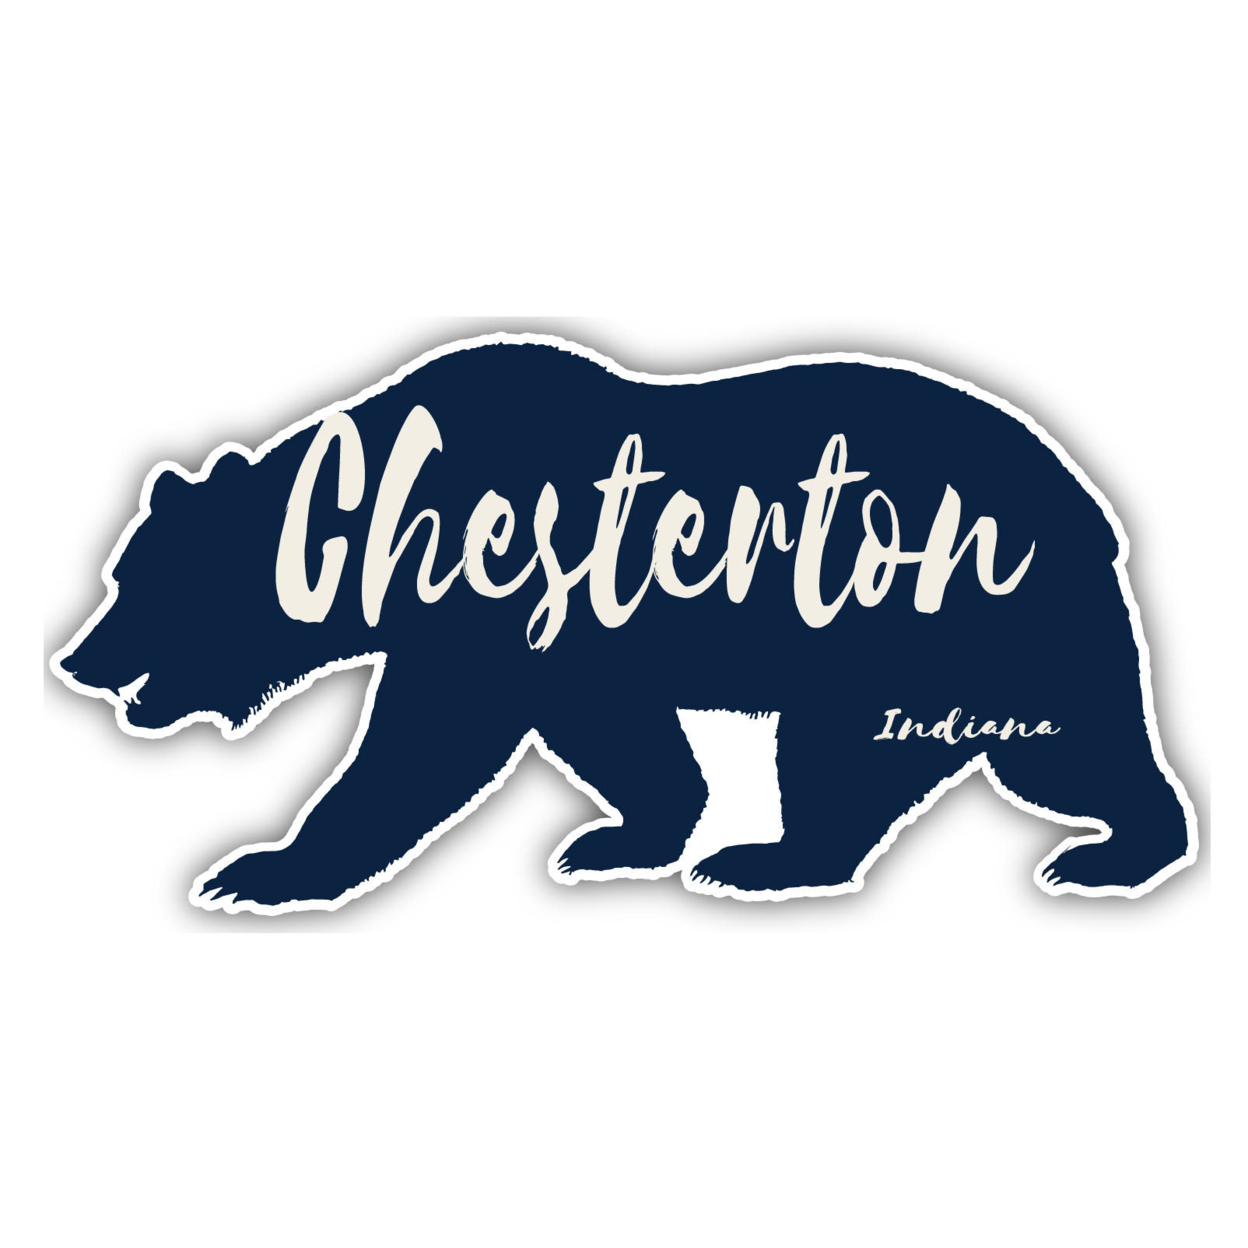 Chesterton Indiana Souvenir Decorative Stickers (Choose Theme And Size) - 4-Pack, 2-Inch, Bear